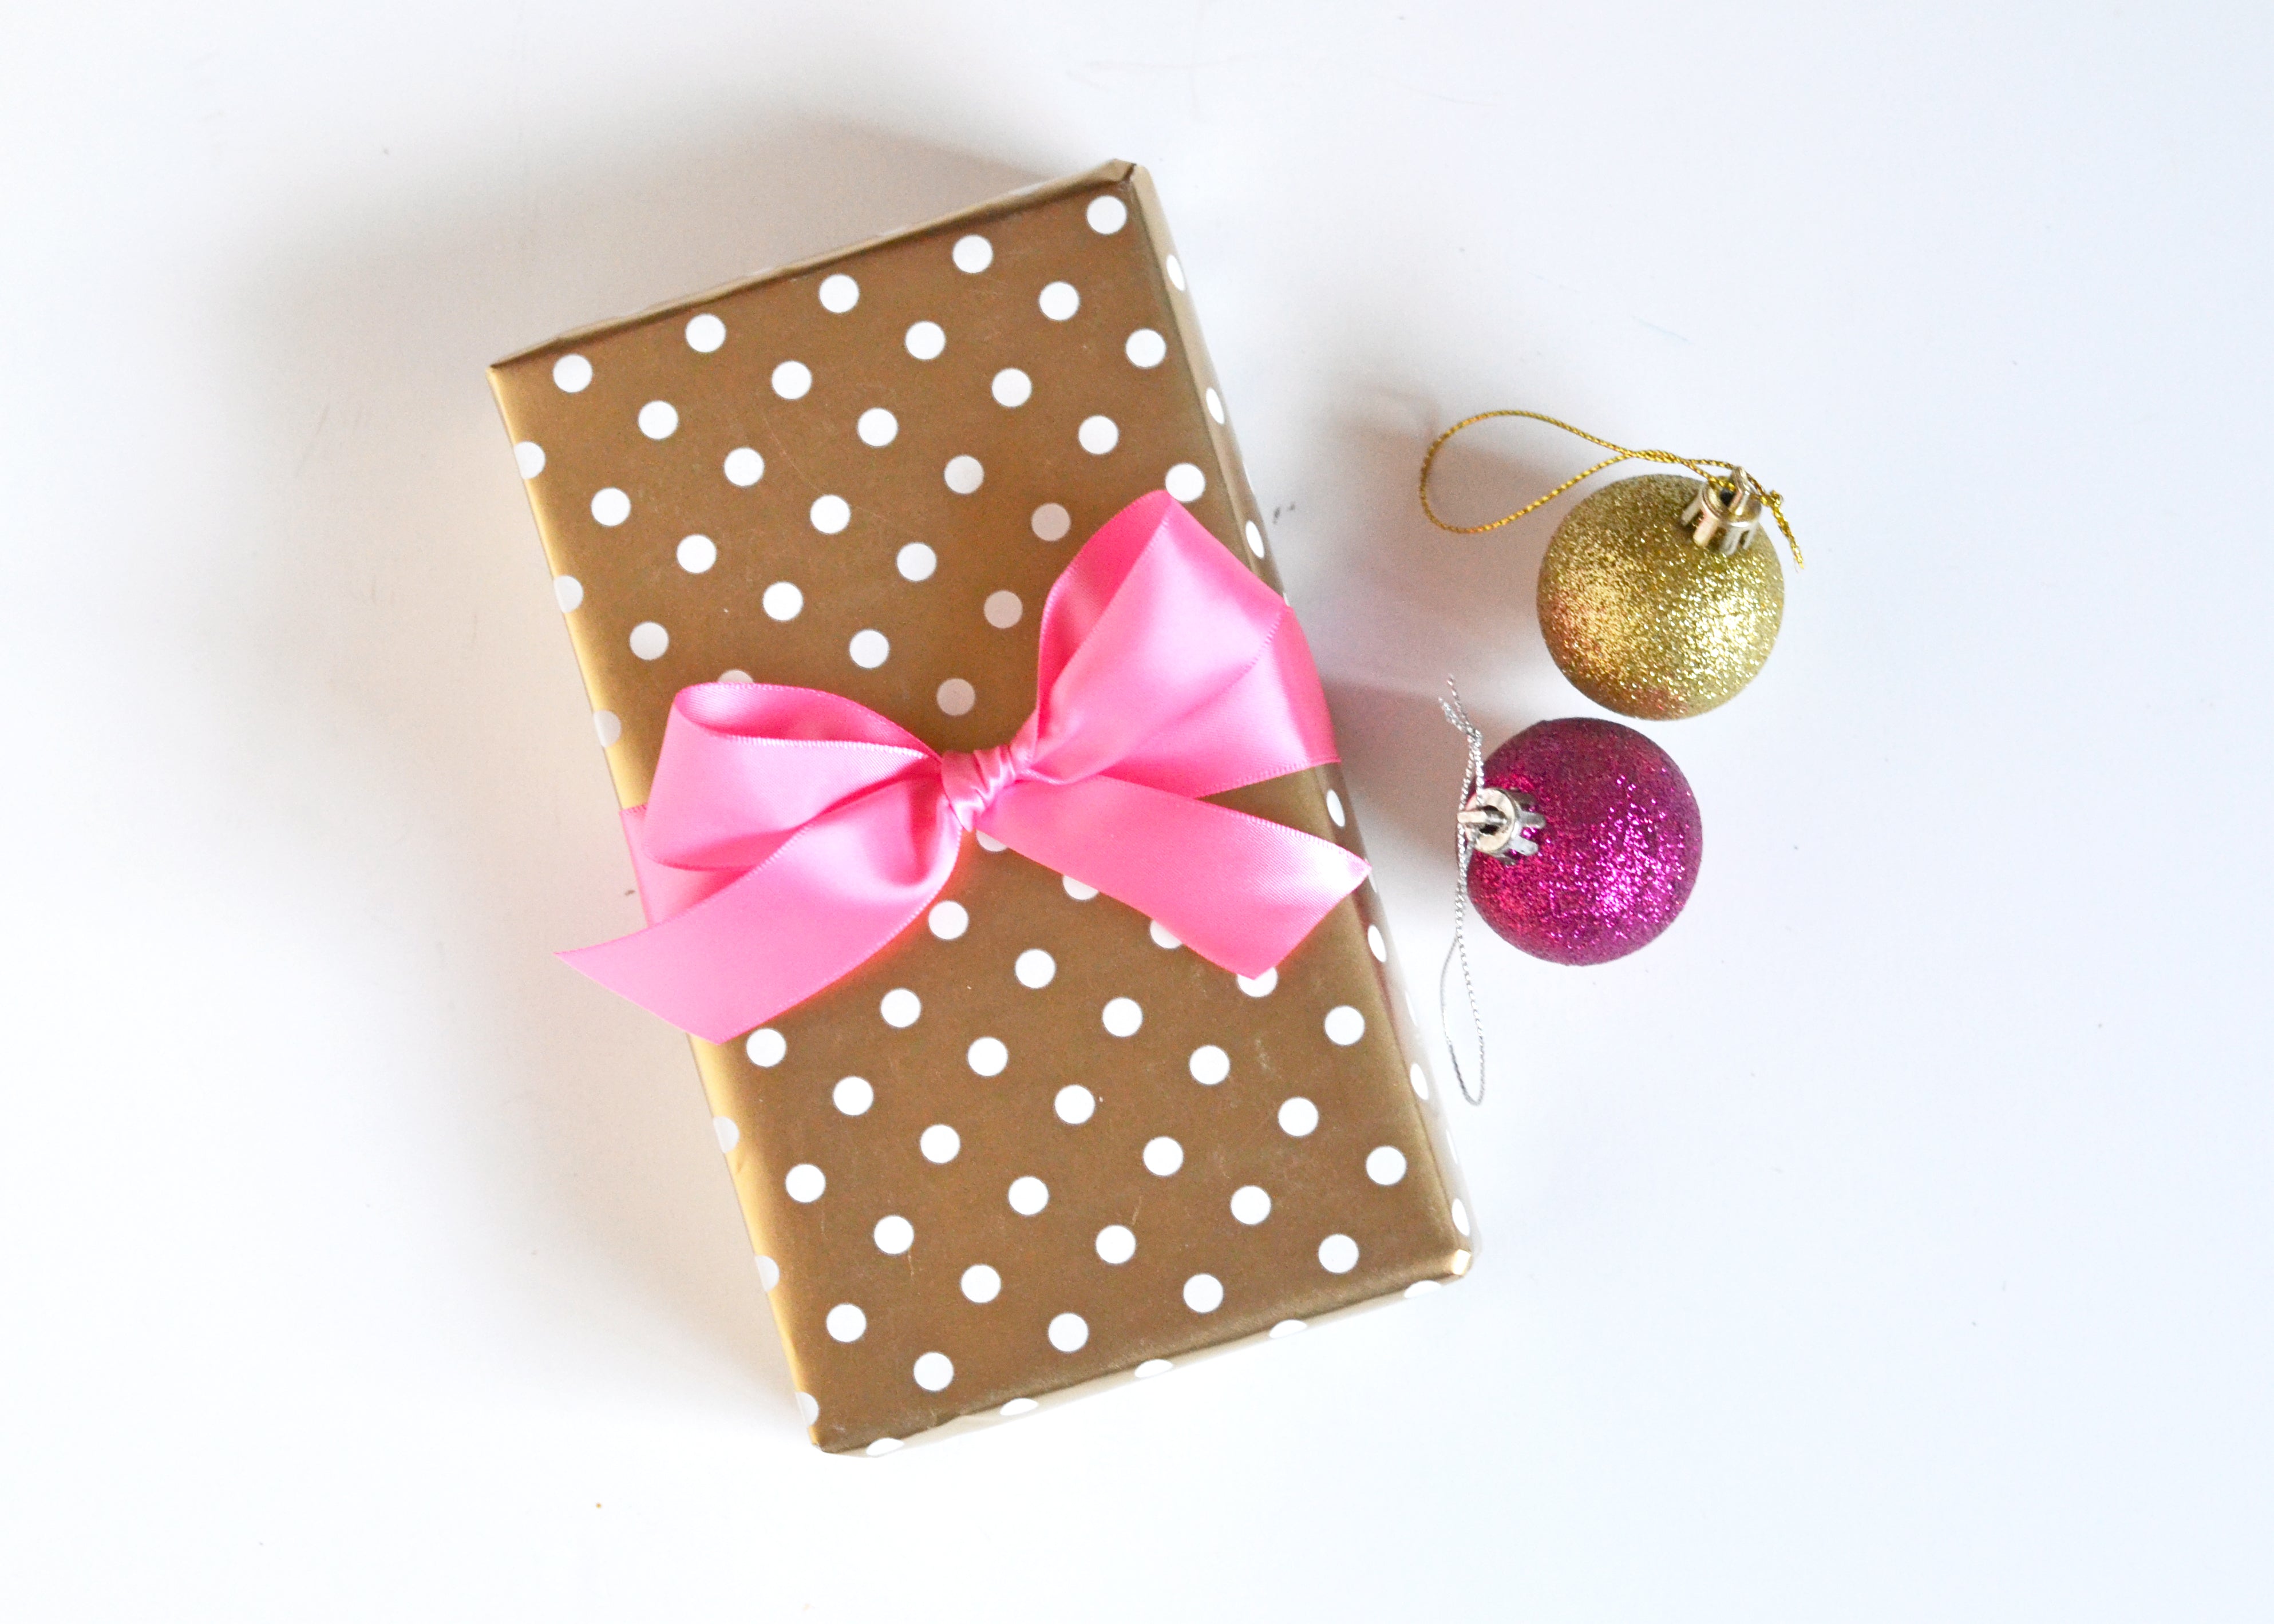 How to Wrap Oddly Shaped Gifts | Apartment Therapy